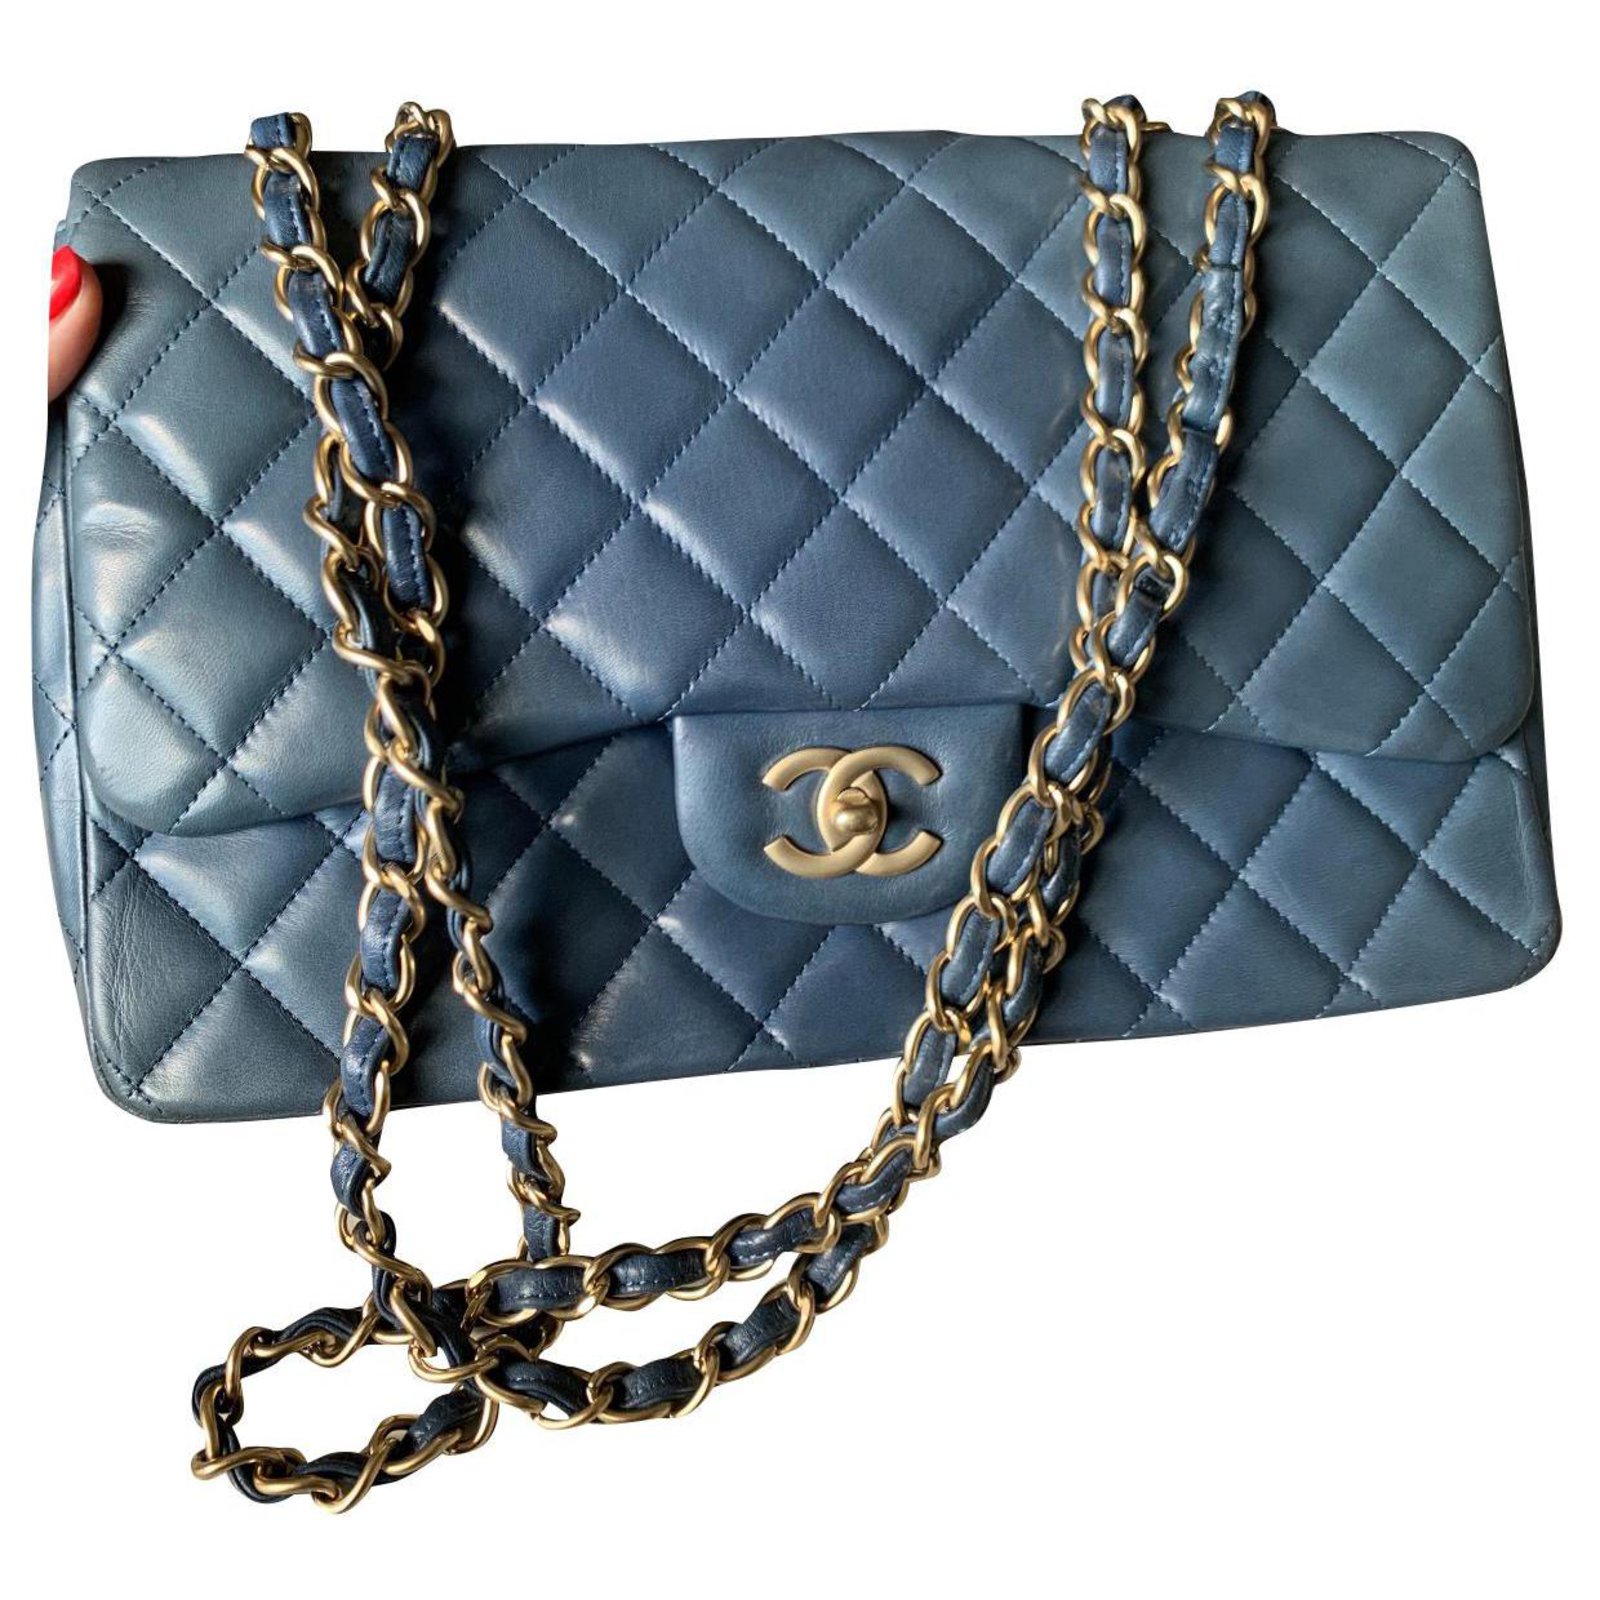 CHANEL, BLUE AND MULTICOLORED EMBELLISHED CANVAS SHOULDER BAG, Chanel:  Handbags and Accessories, 2020